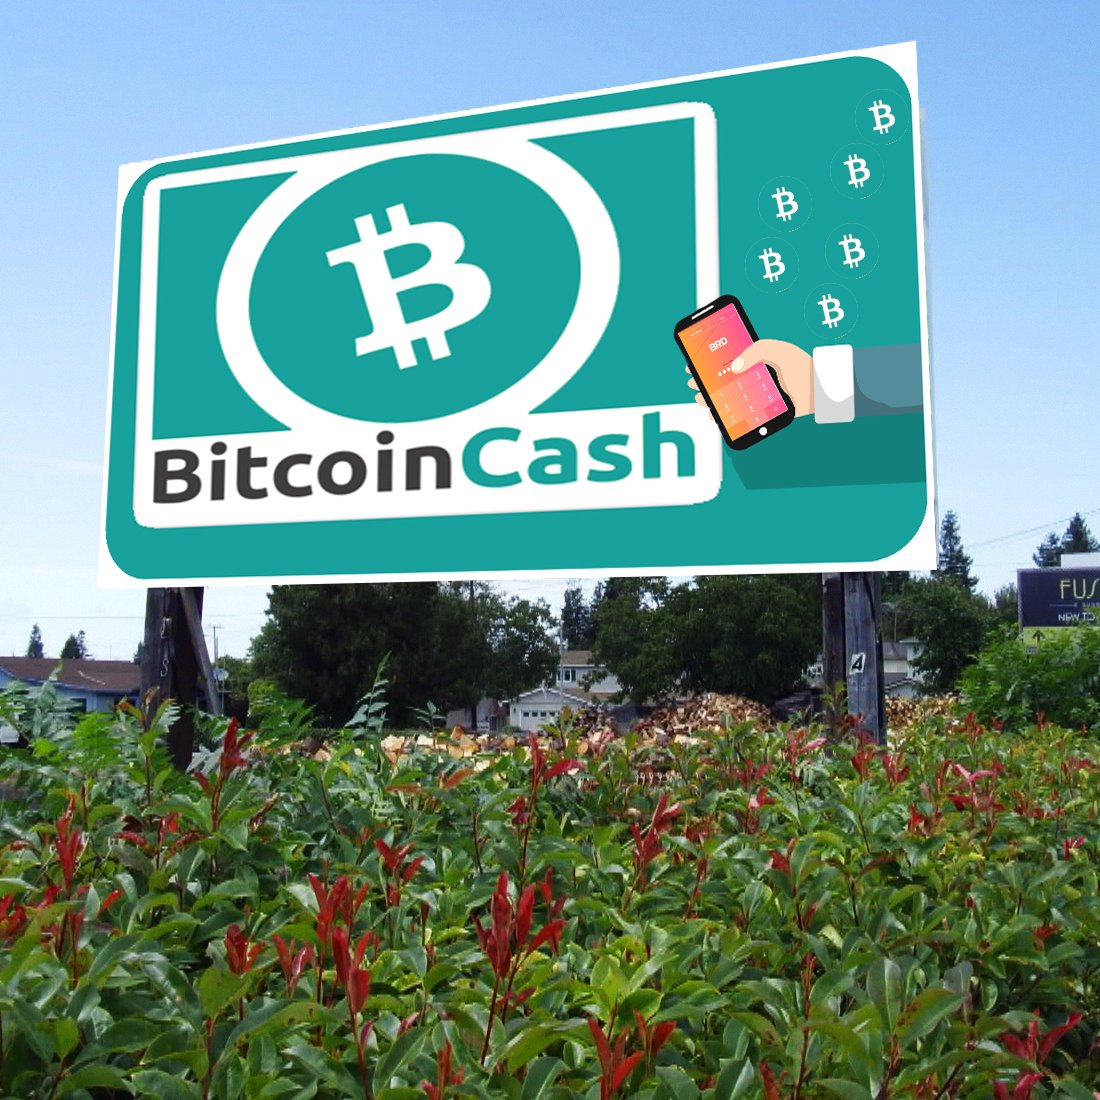 Wallet Provider Bread Adds Bitcoin Cash Support for Apple Devices